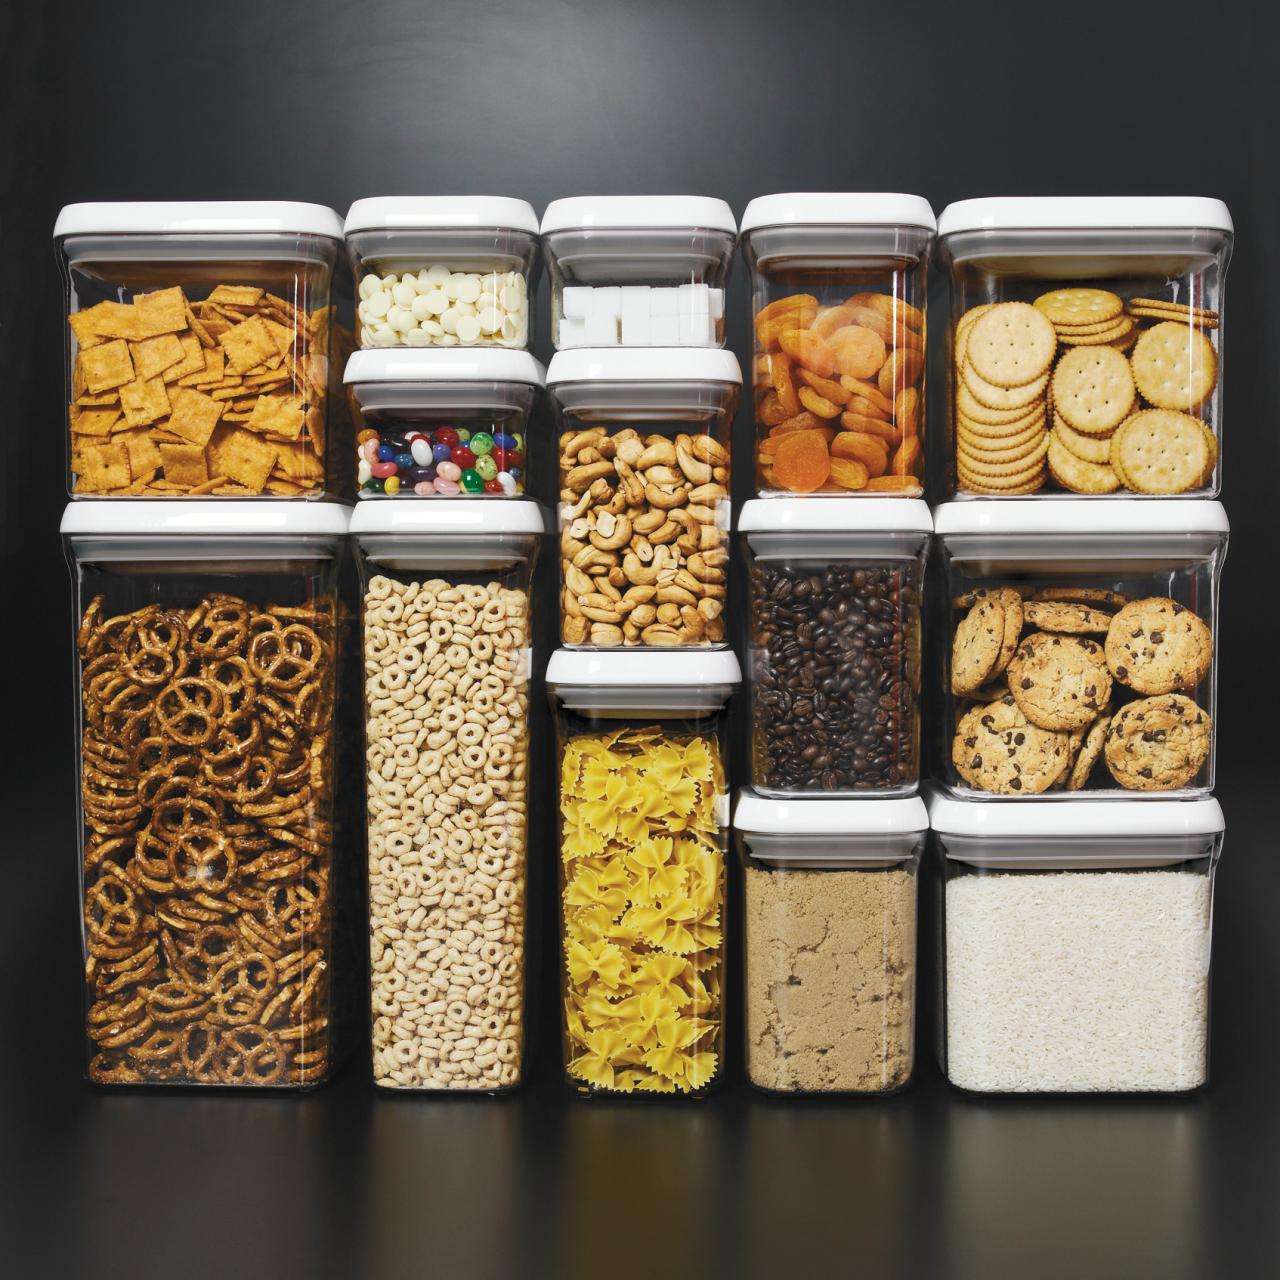 Organize Your Pantry for Healthier Eating